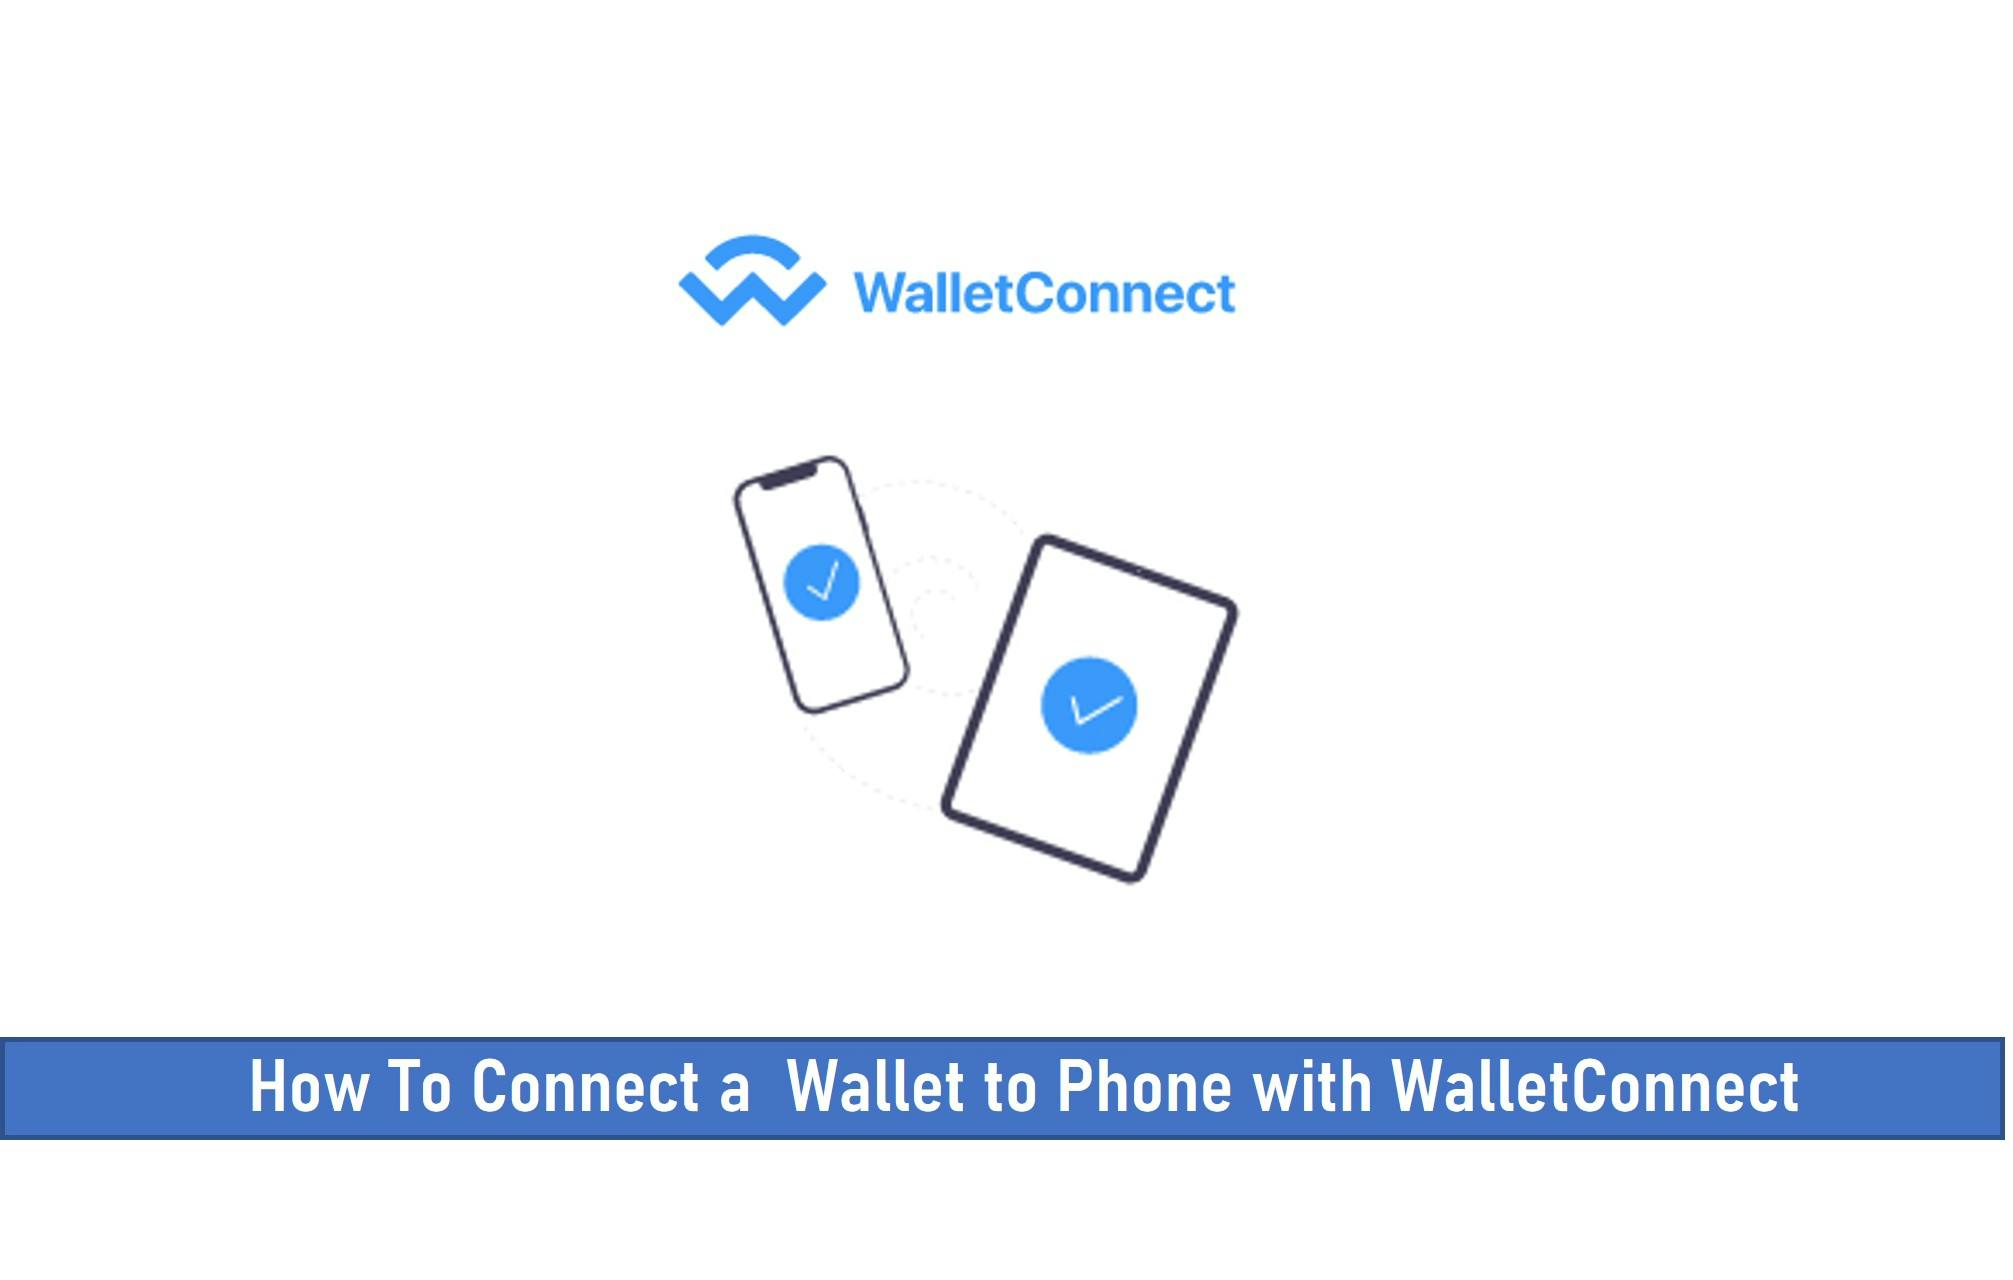 How To Connect a Wallet to Phone with WalletConnect